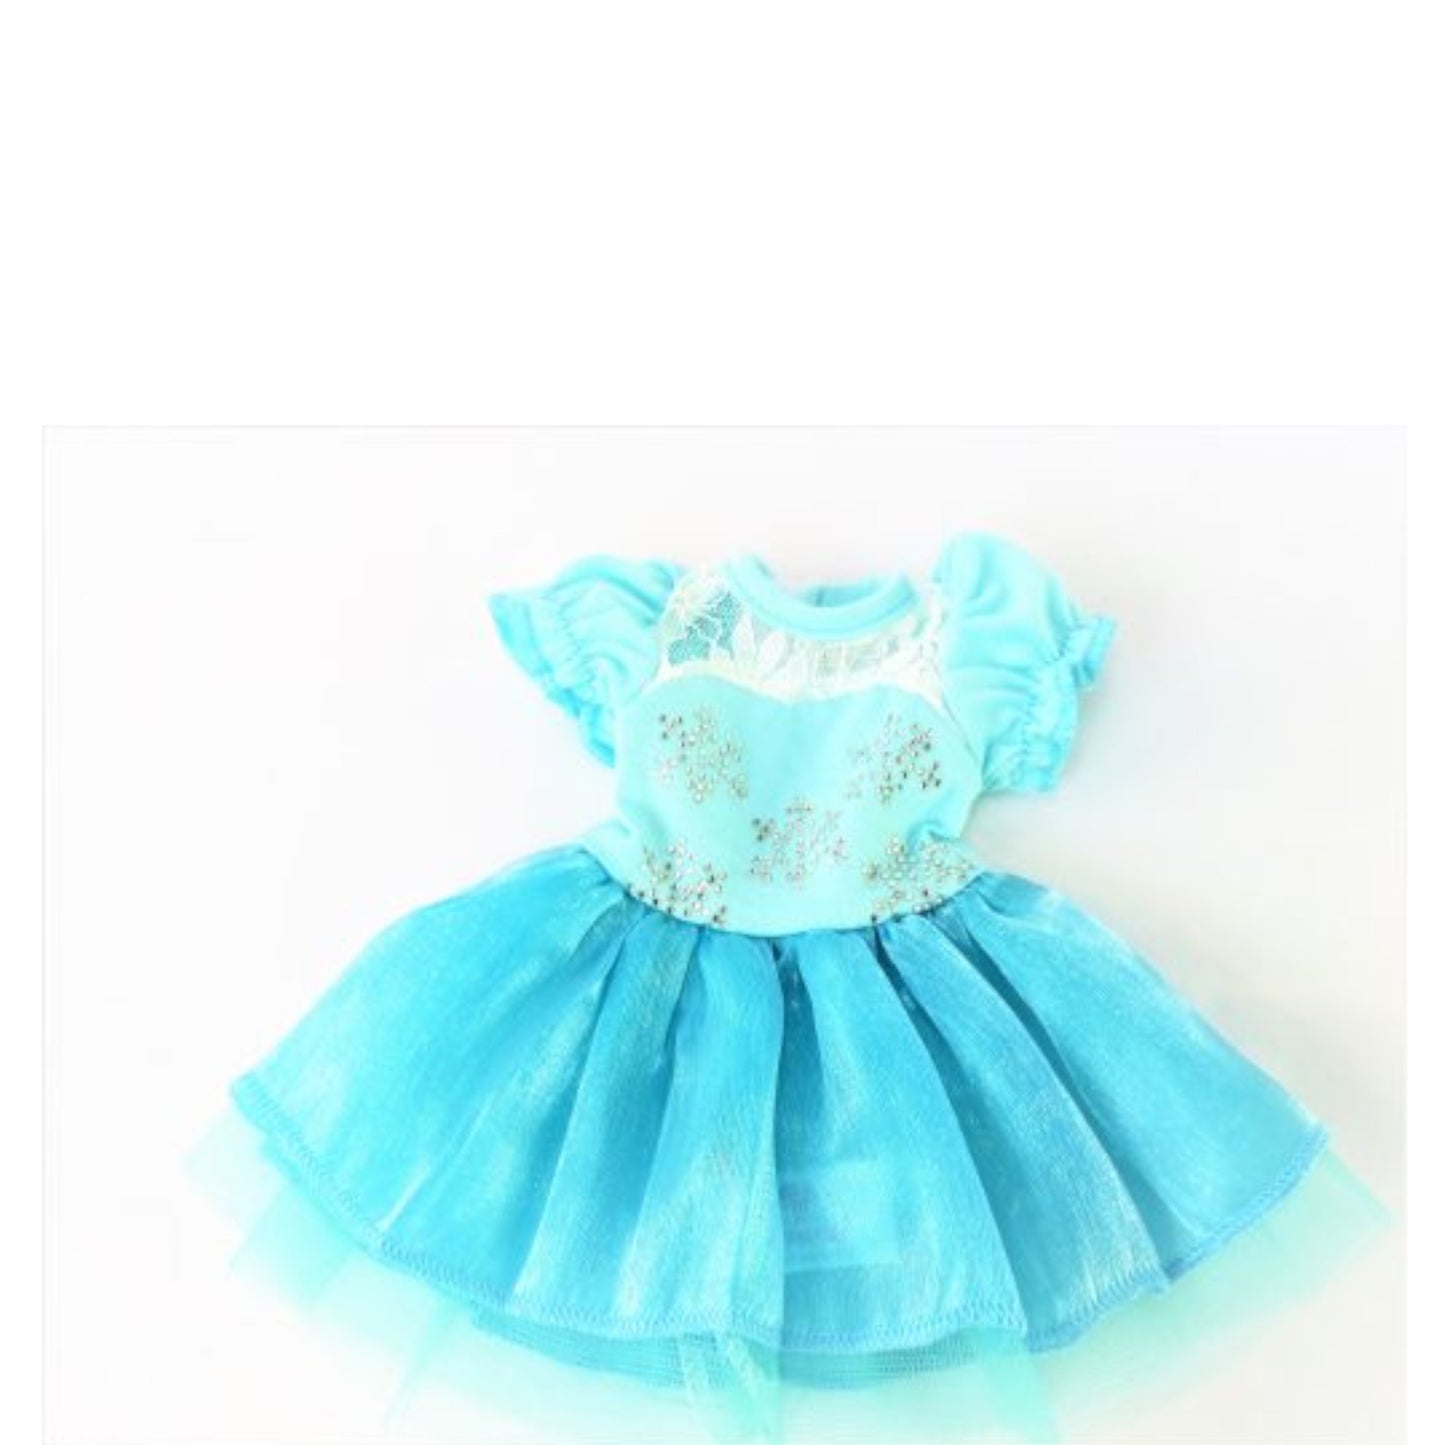 Teal Sparkle Snowflake Dress for 14 1/2-inch dolls Flat